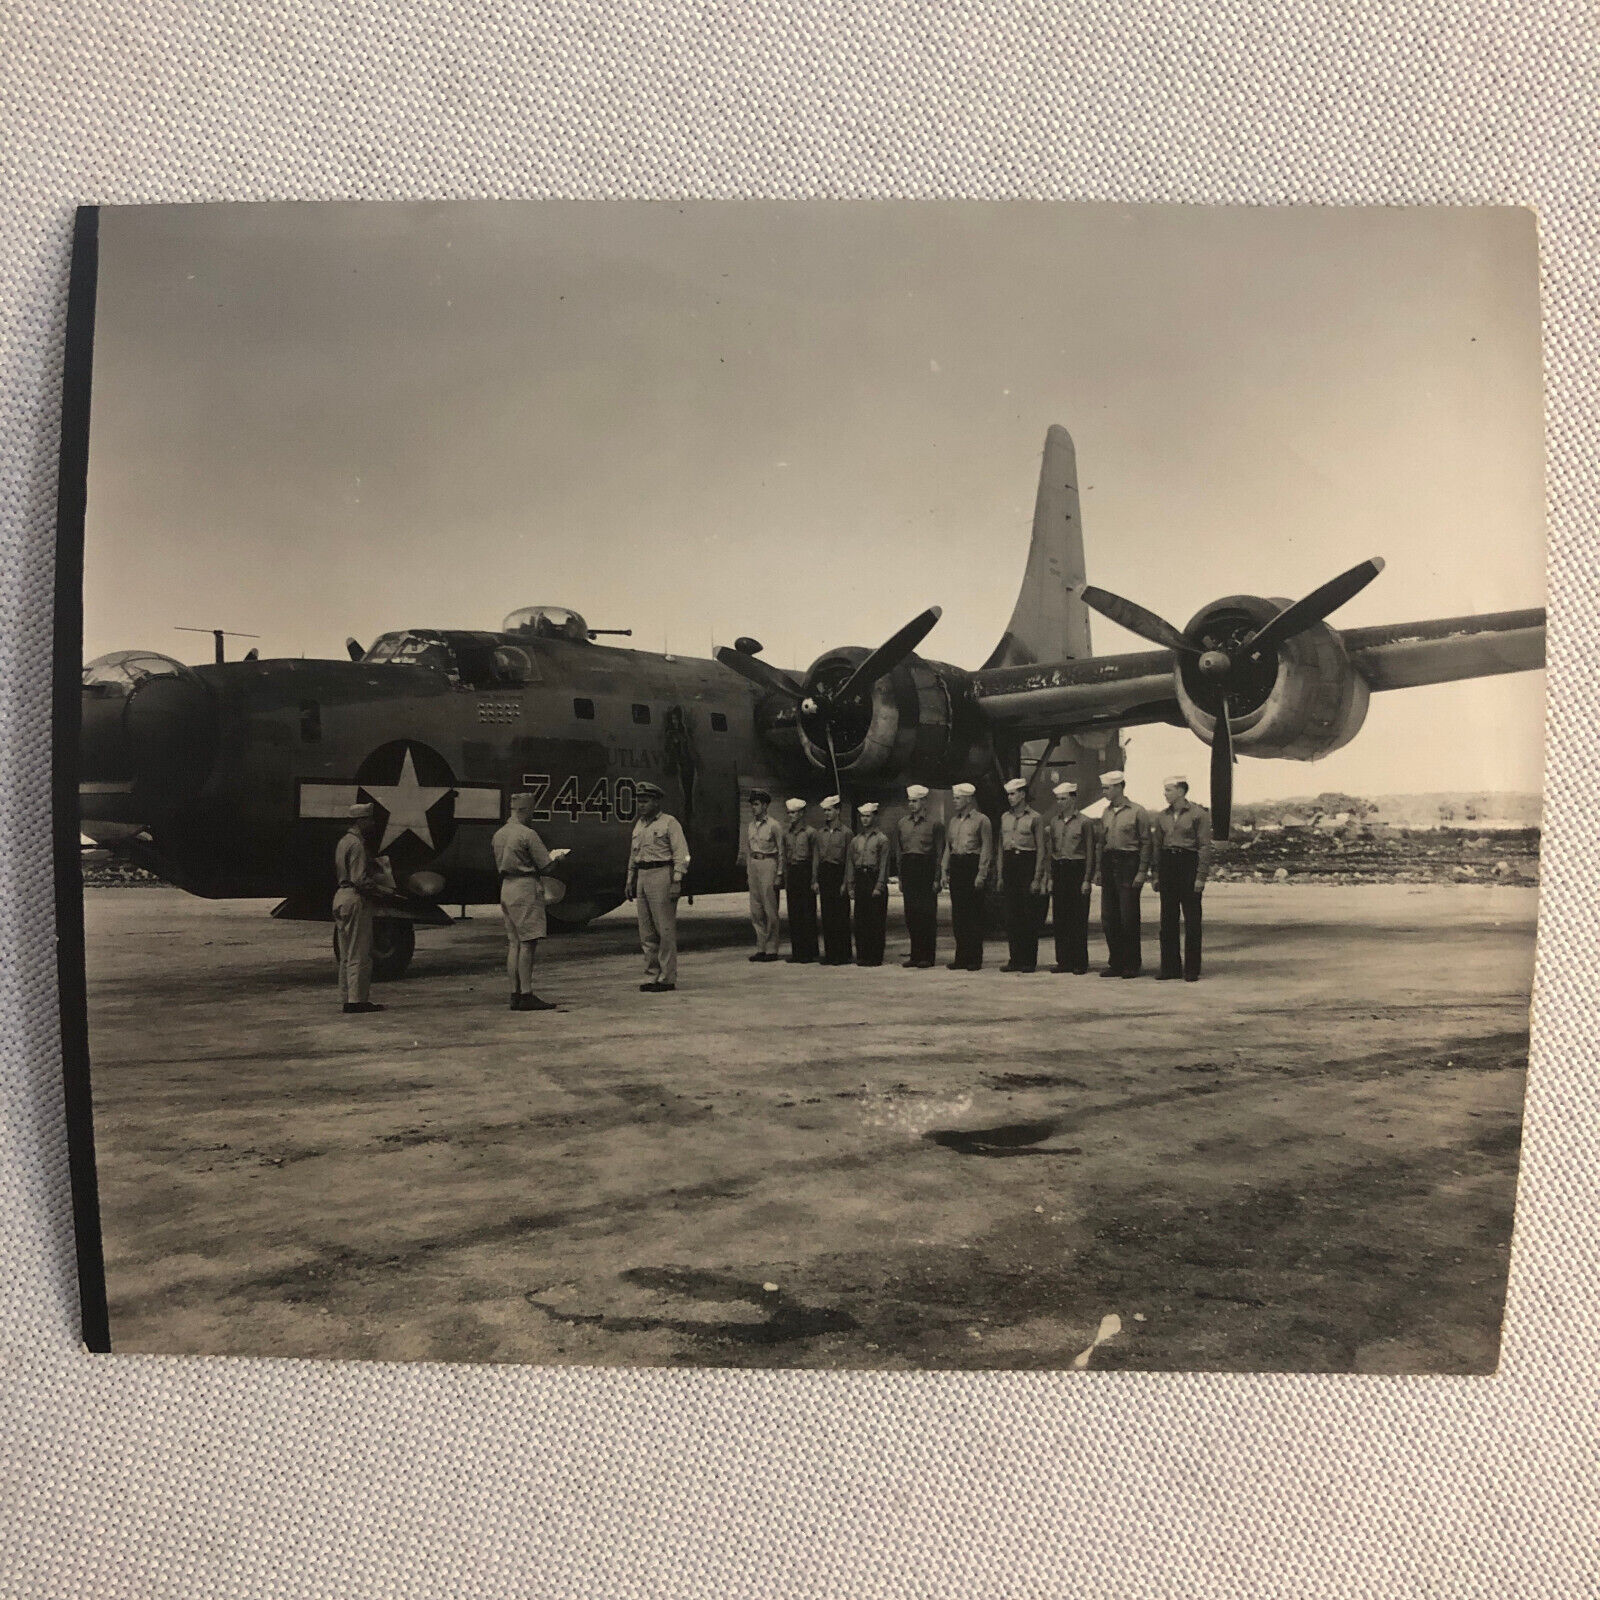 Military Aircraft with Soldiers Photo Photograph Print Vintage Airplane Plane